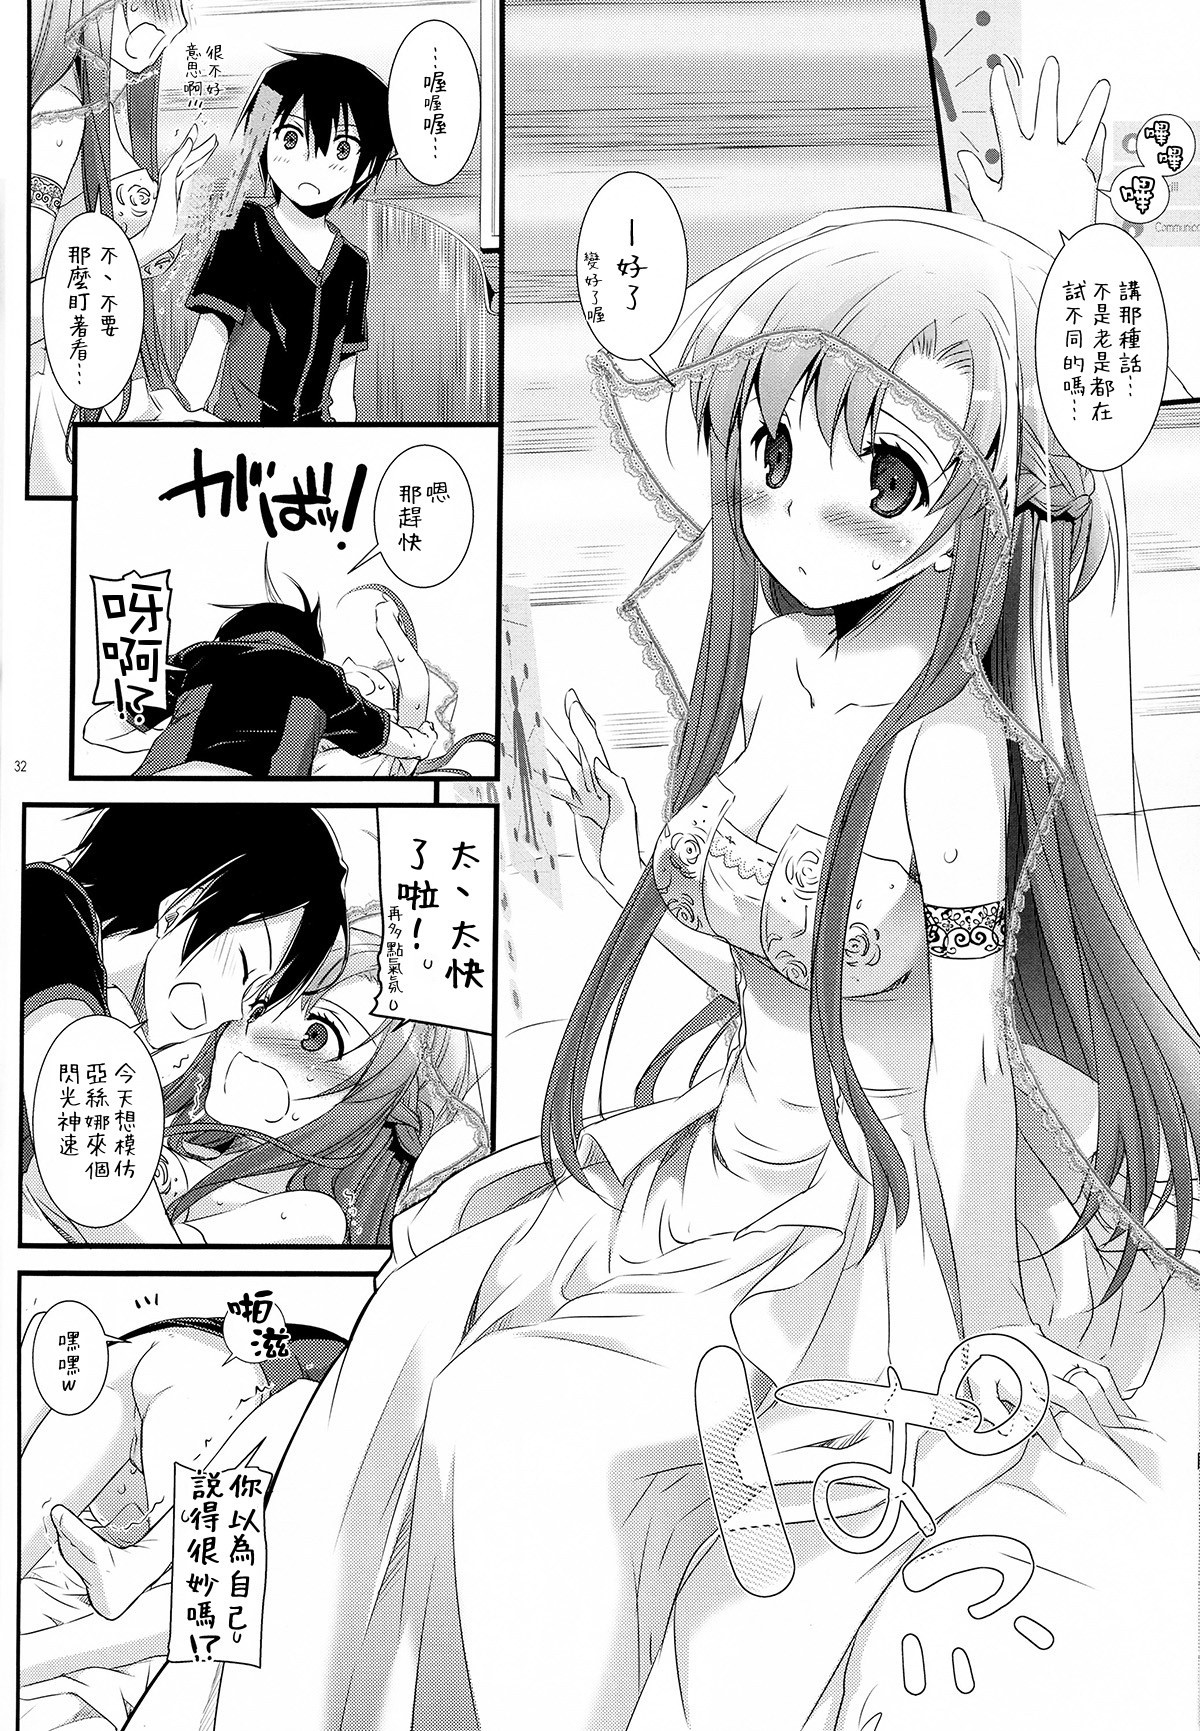 D.L. Action 71 hentai manga picture 31